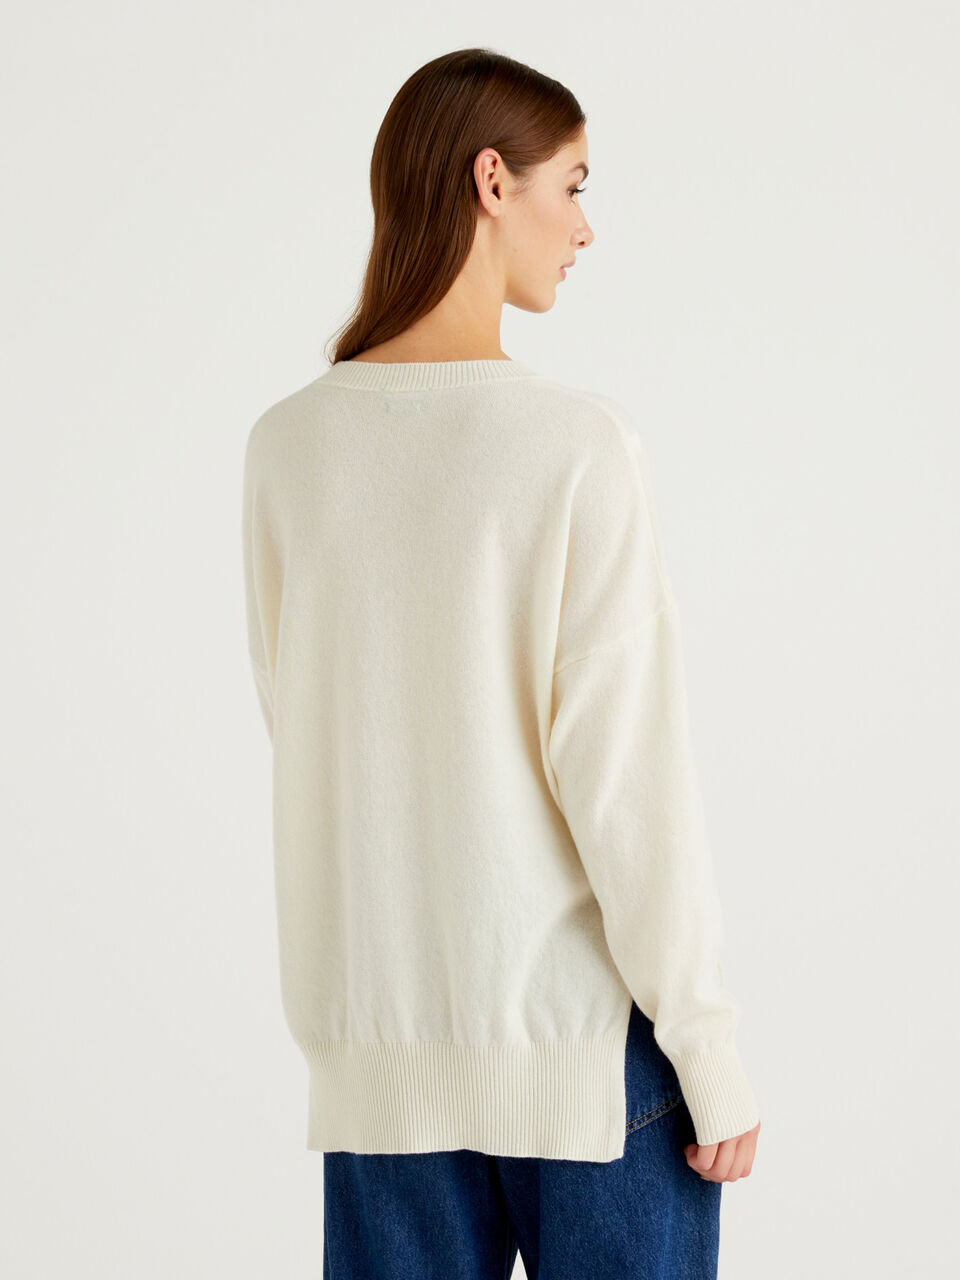 Oversized sweater with slits - Creamy White | Benetton